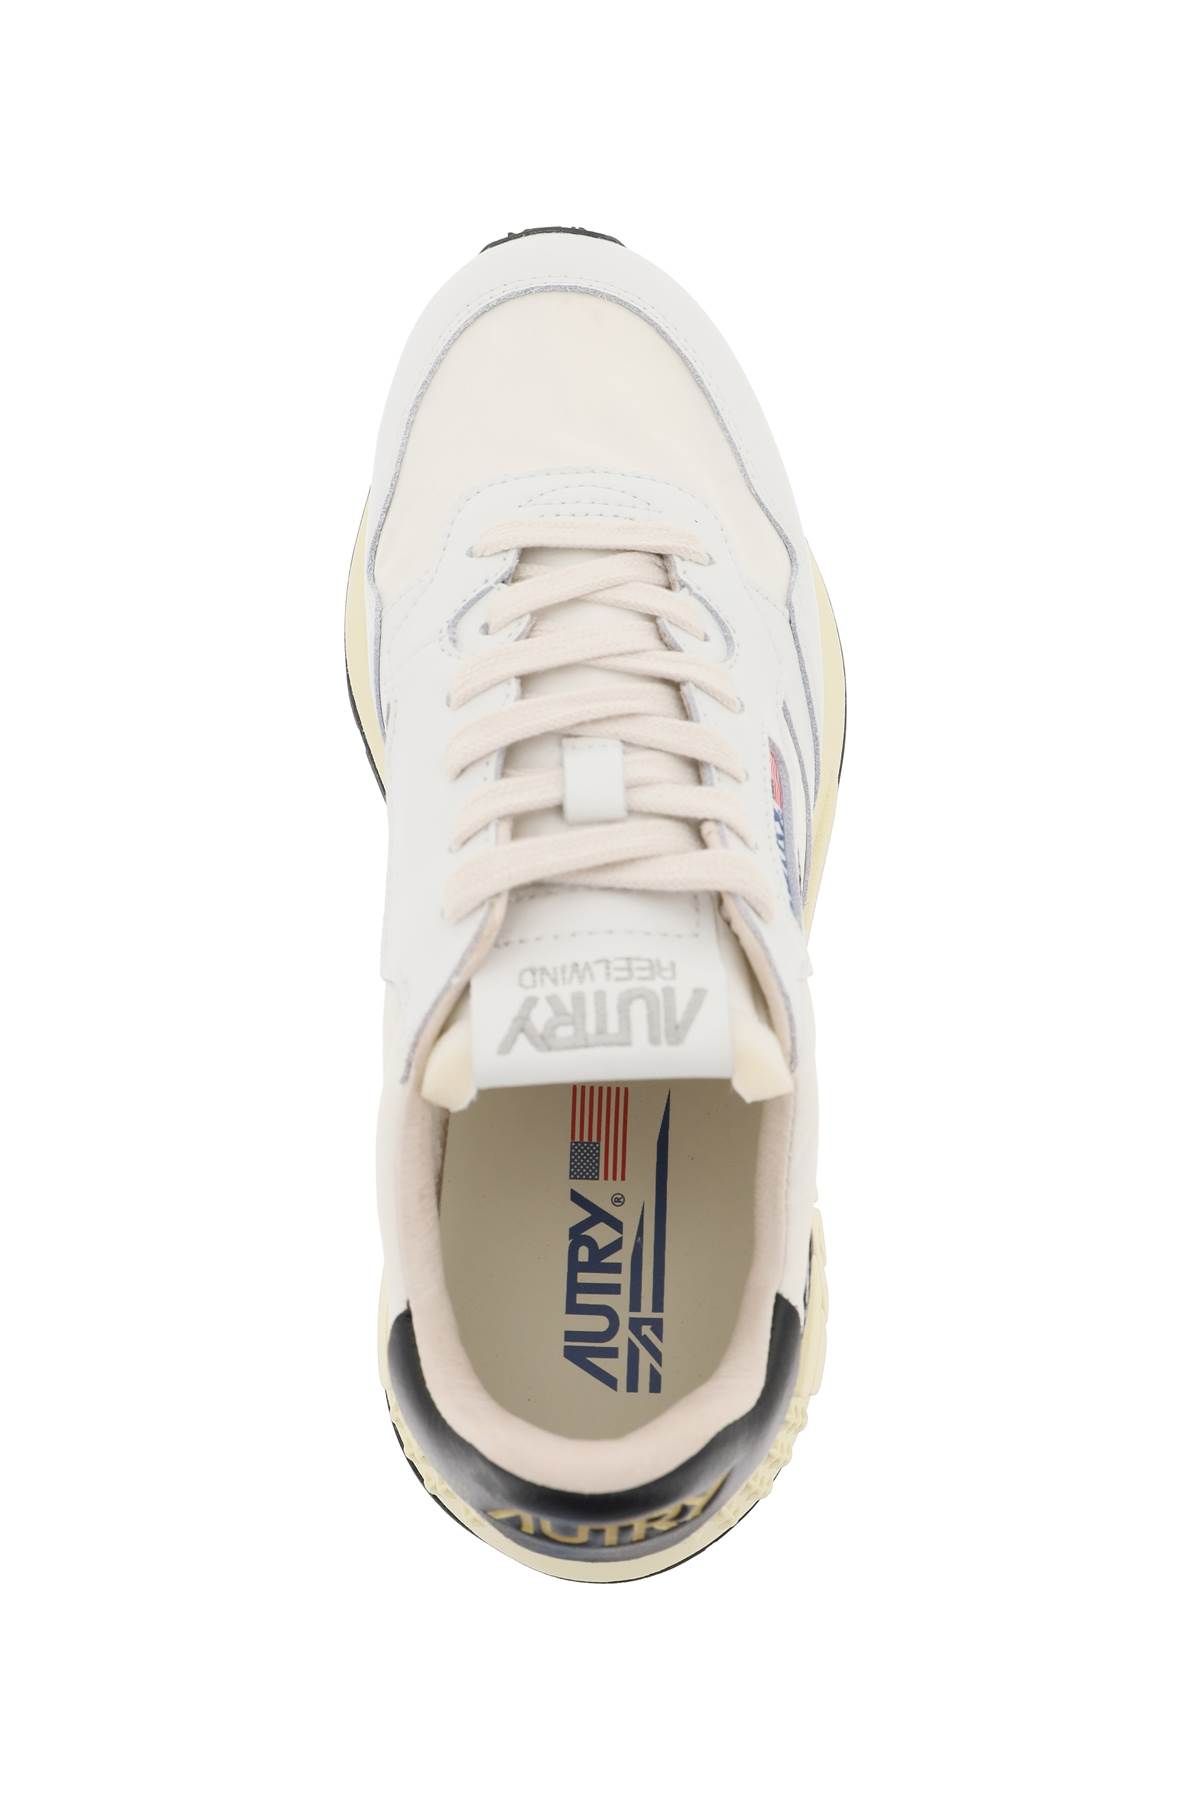 Shop Autry Low-cut Nylon And Leather Reelwind Sneakers In White,black